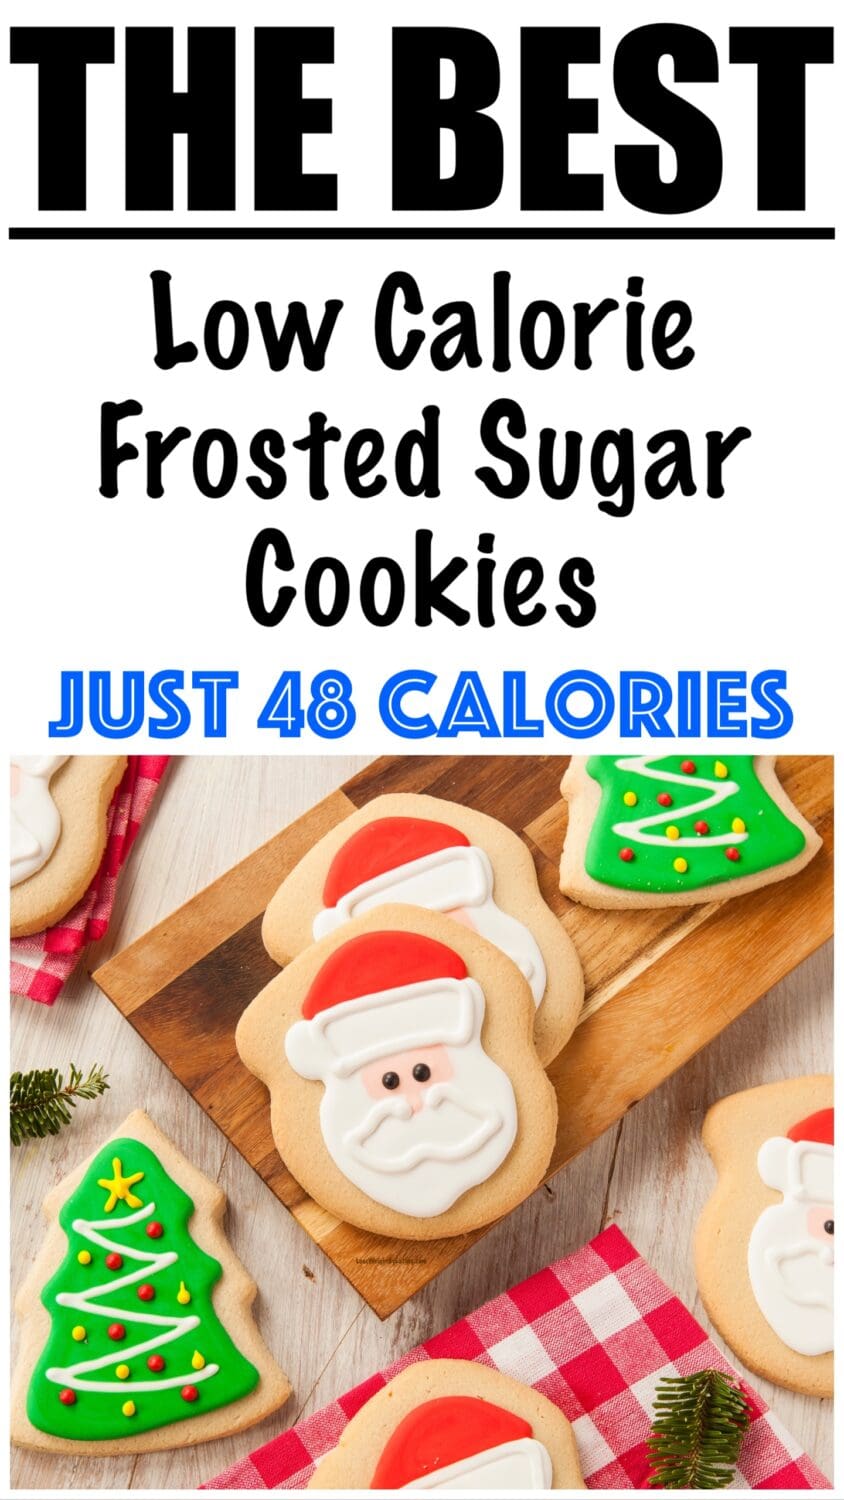 Low Calorie Frosted Sugar Cookies